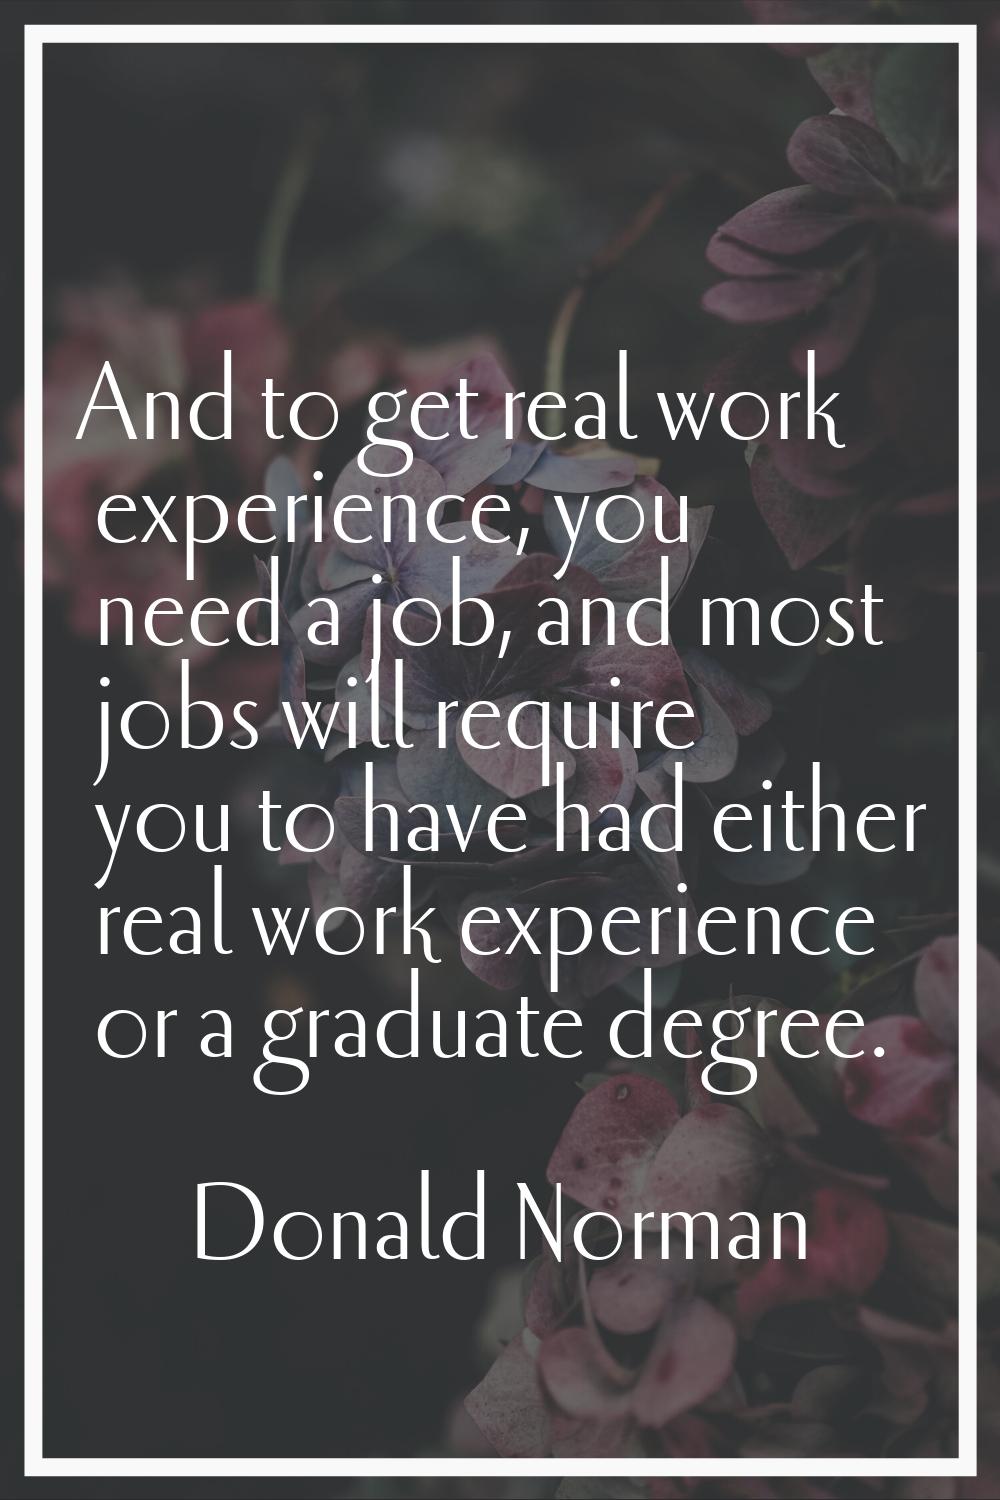 And to get real work experience, you need a job, and most jobs will require you to have had either 